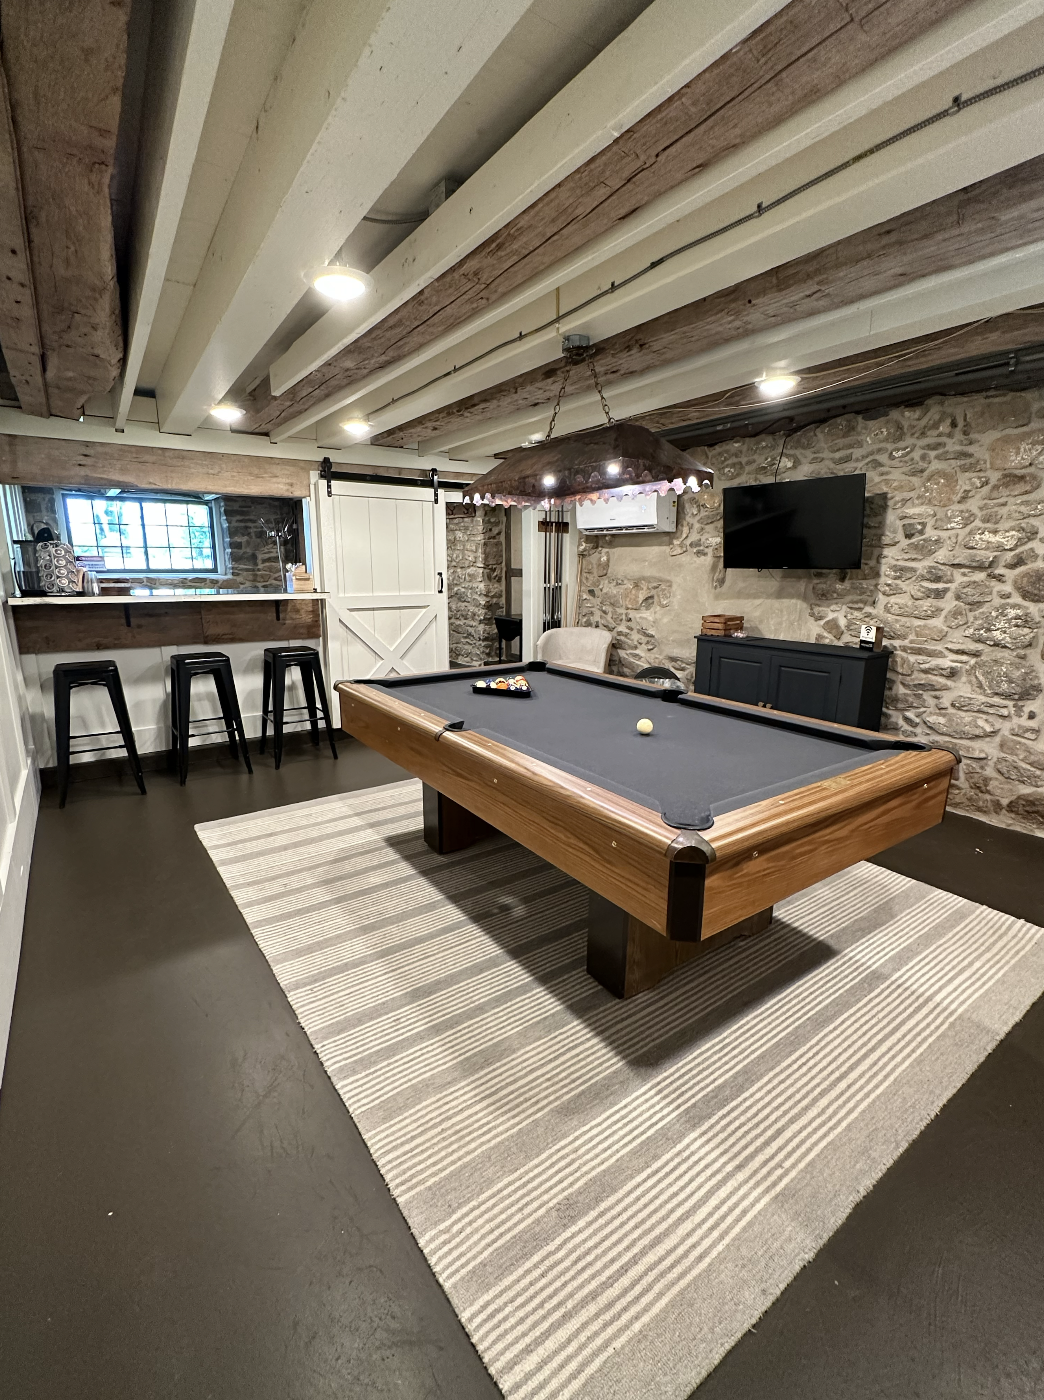 Pool table in Grooms suite at The Farm Bakery and Events in Quakertown, Bucks County PA